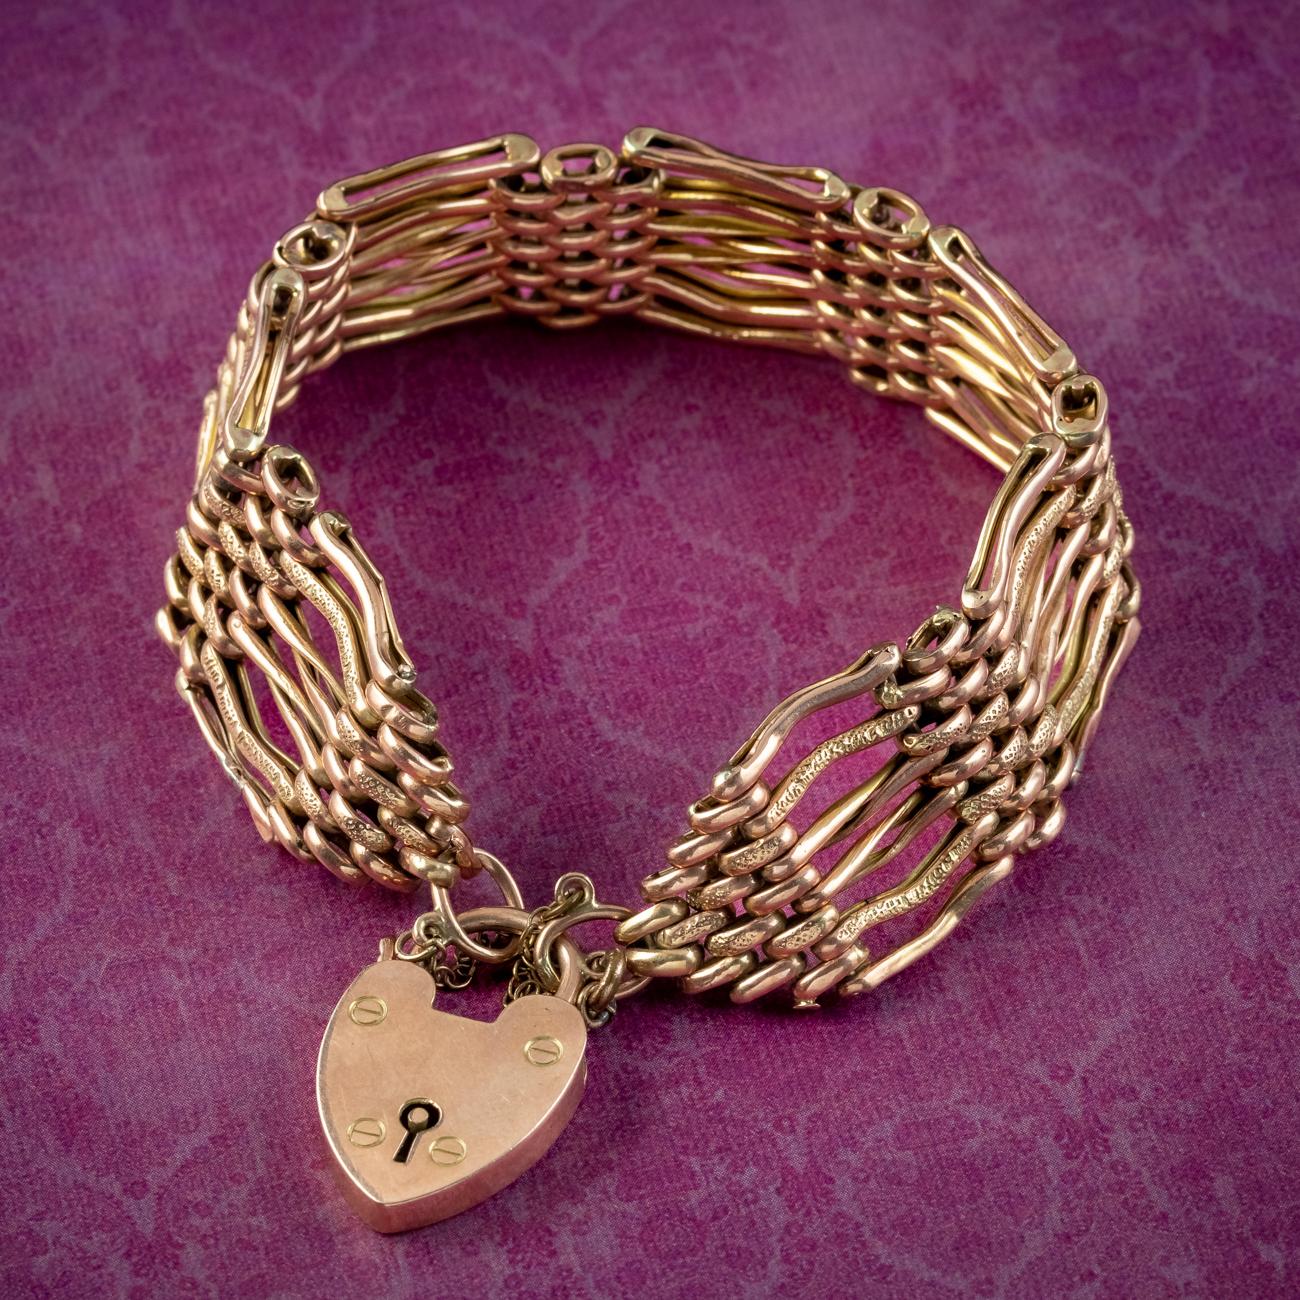 A grand antique Victorian gate bracelet from the late 19th Century fashioned entirely in 9ct gold. The wide band consists of twisted gate links etched with textured detailing and is held by a safety chain and large heart padlock clasp.

Heart